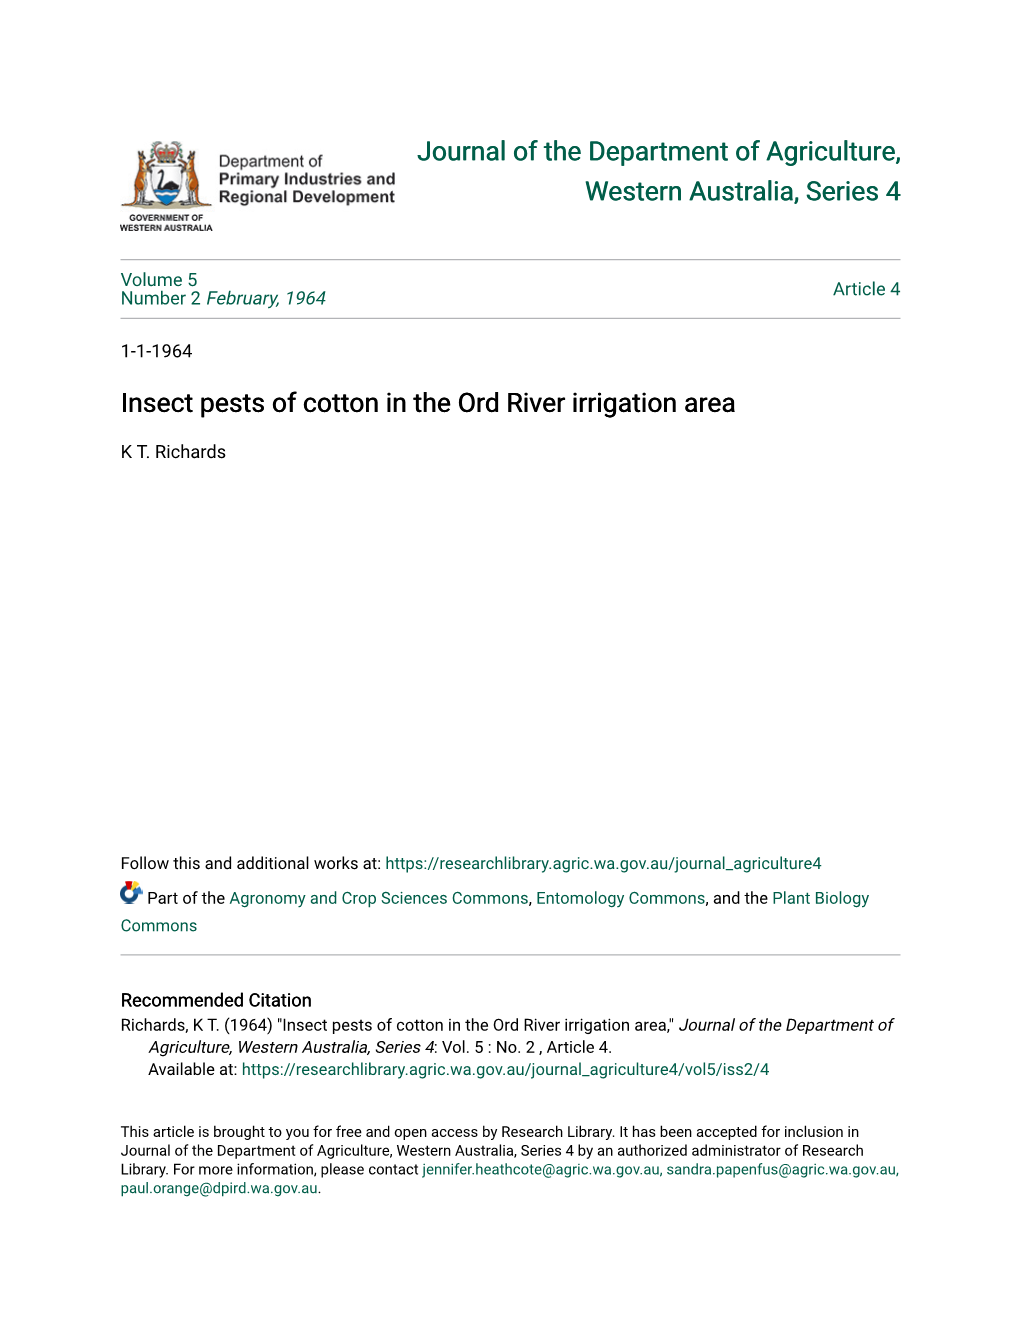 Insect Pests of Cotton in the Ord River Irrigation Area